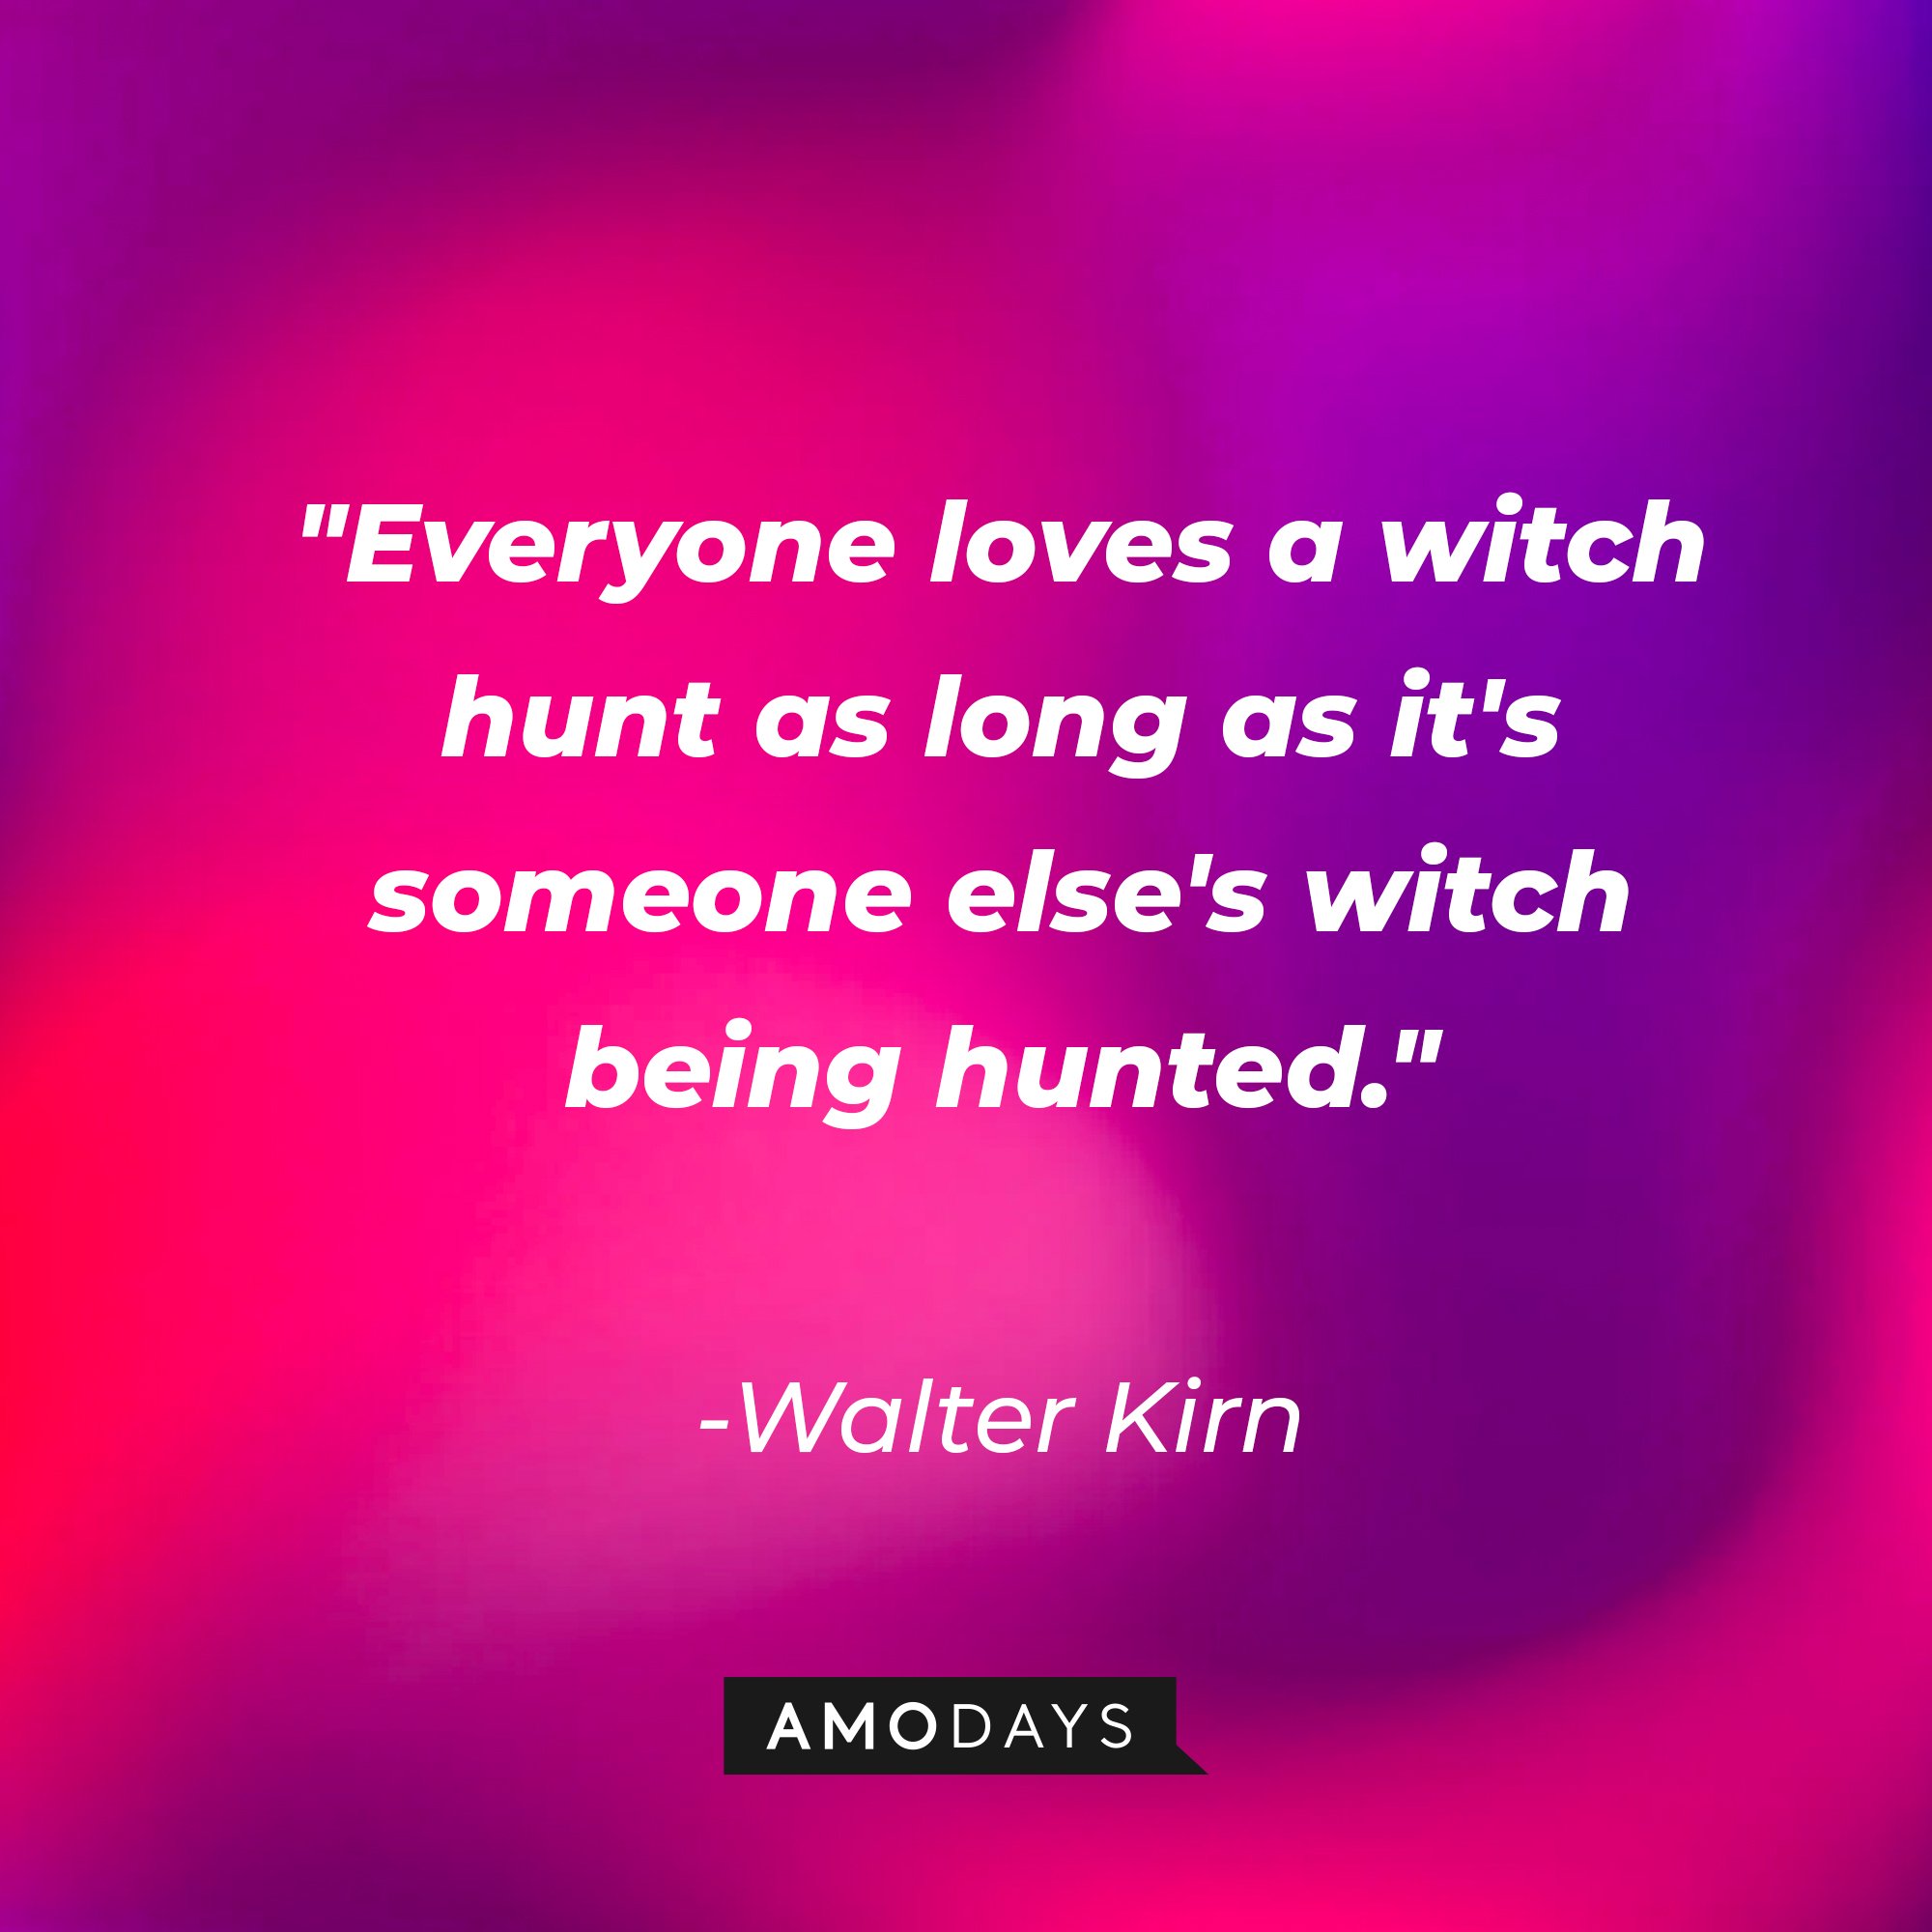 Walter Kirn's quote:\\\\\\\\\\\\\\\\u00a0"Everyone loves a witch hunt as long as it's someone else's witch being hunted."\\\\\\\\\\\\\\\\u00a0| Image: AmoDays